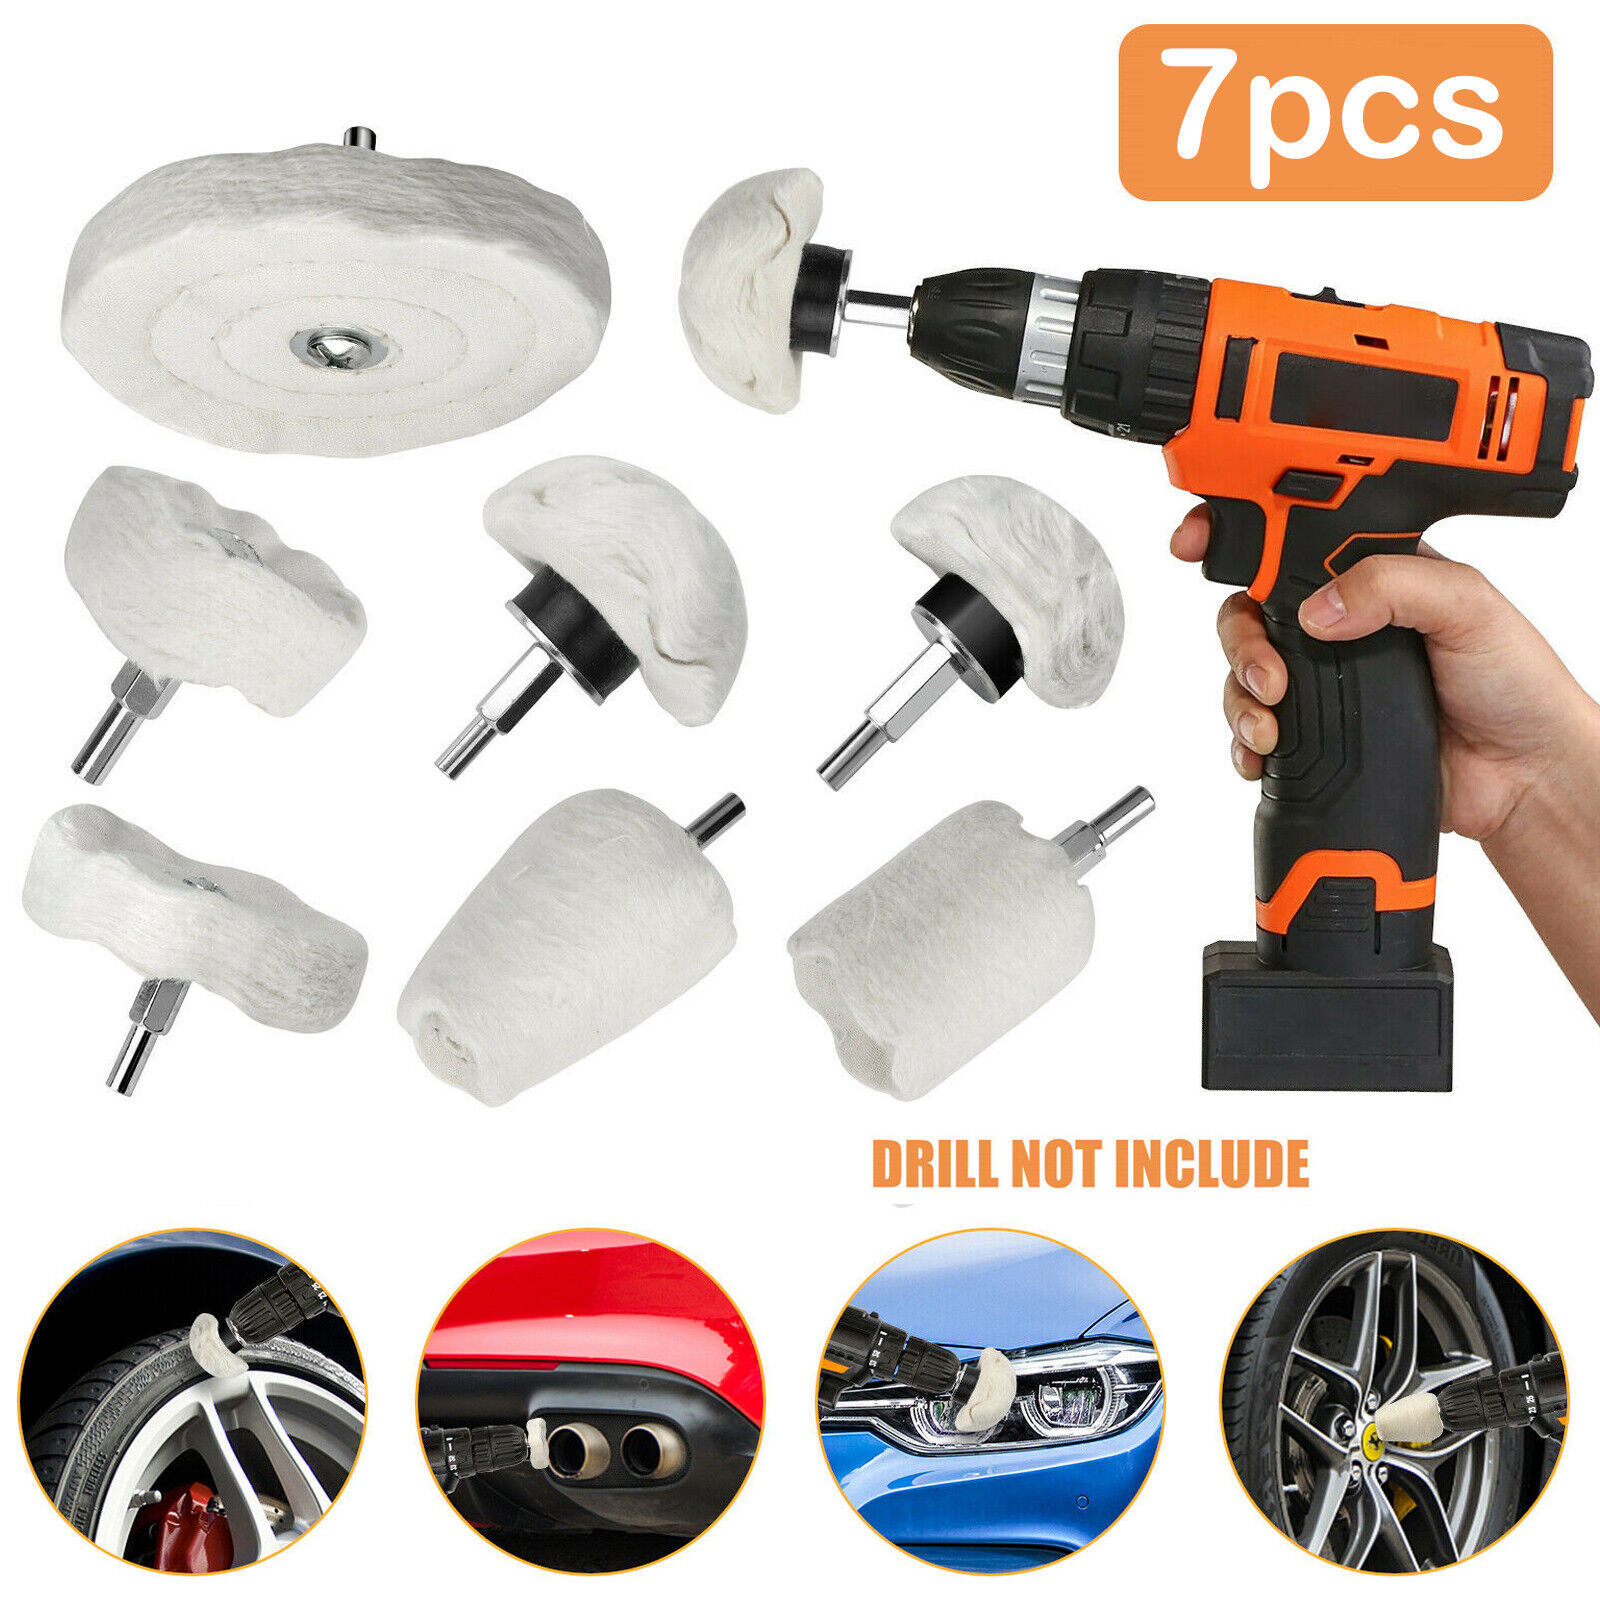 Primary image for 7Pcs Car Polisher Polishing Buffing Pads Mop Wheel Drill Kit Aluminum Stainless